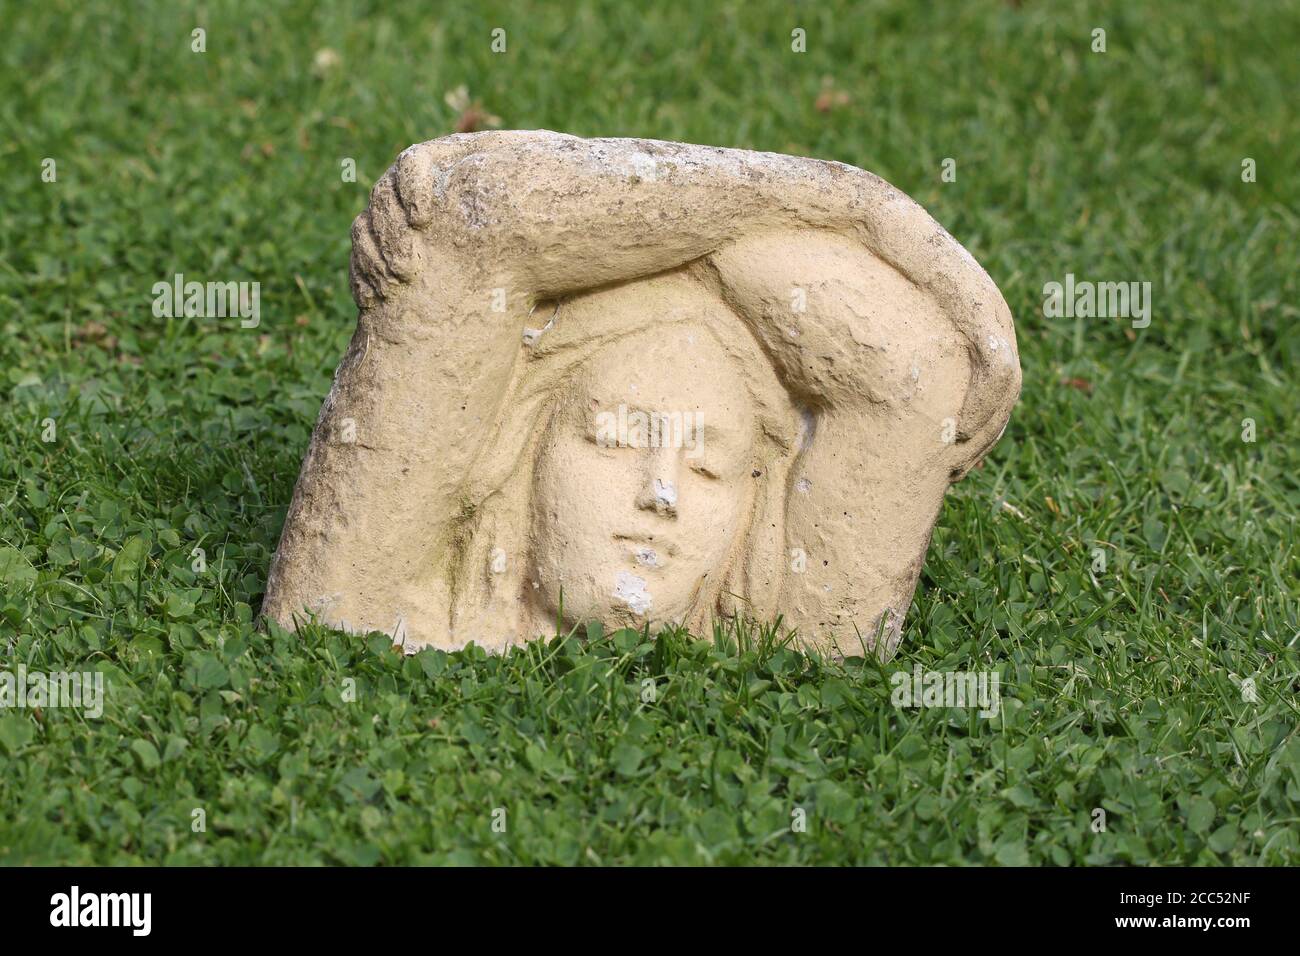 statue of girl sinking into lawn Stock Photo